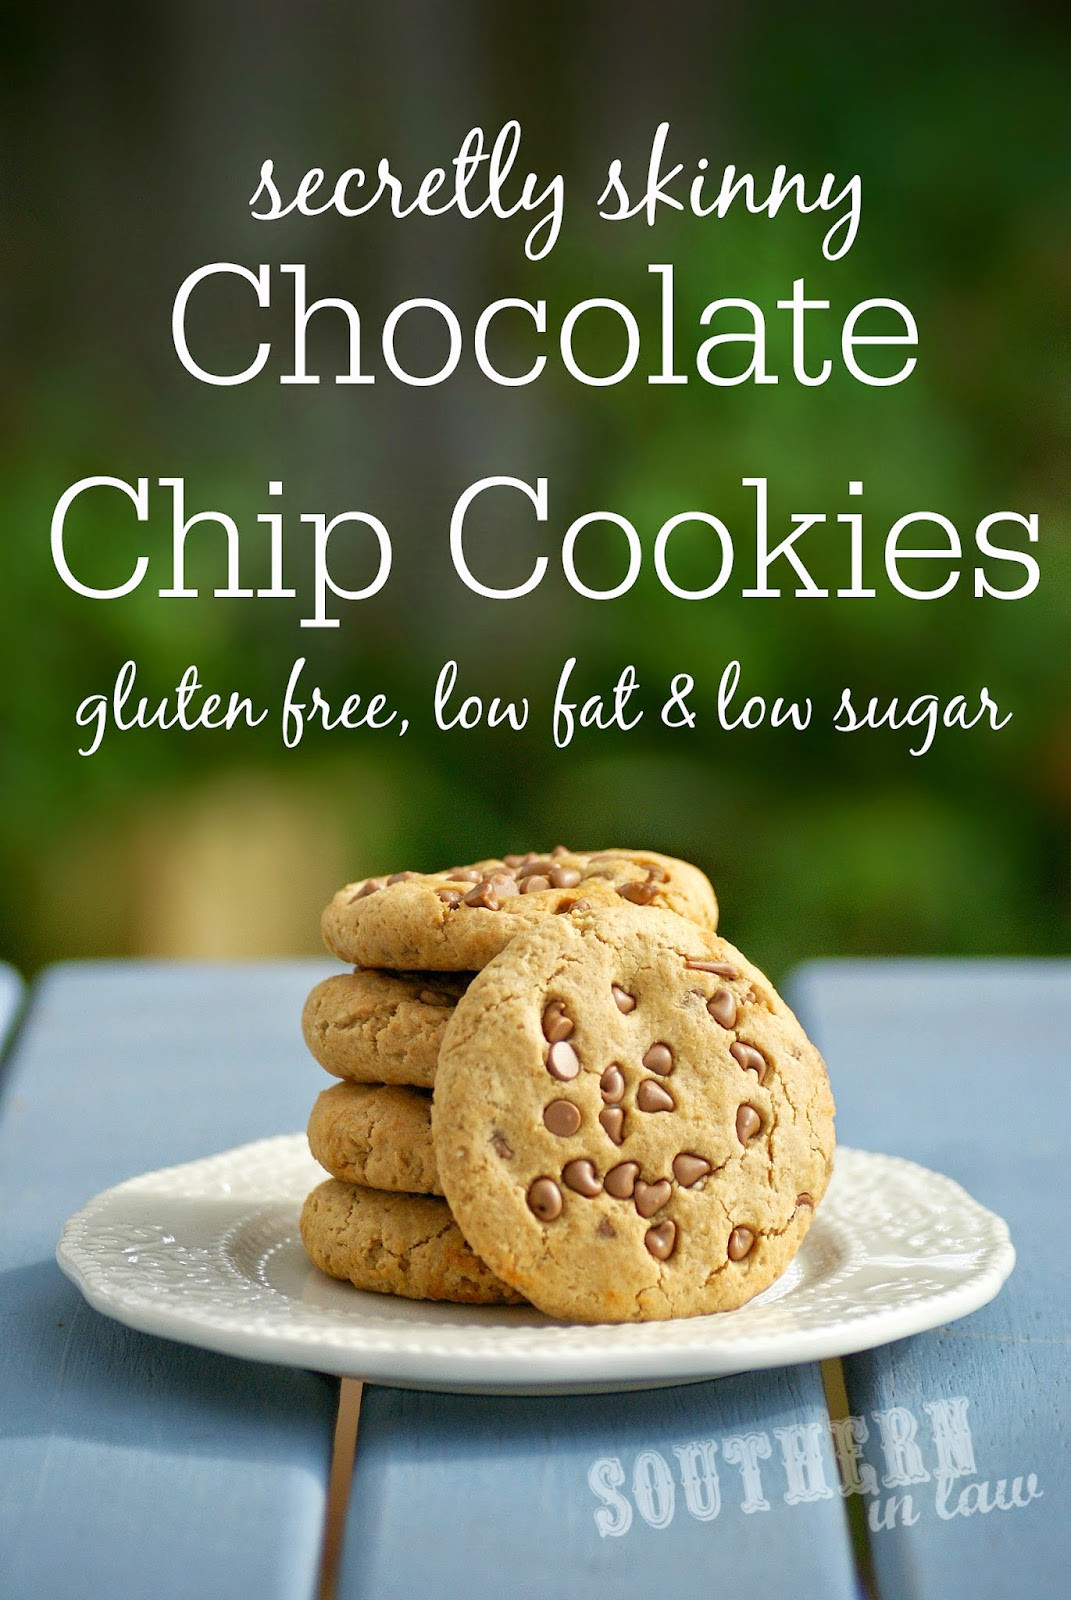 Low Calorie Chocolate Chip Cookies Recipes
 Southern In Law Recipe Secretly Skinny Chocolate Chip